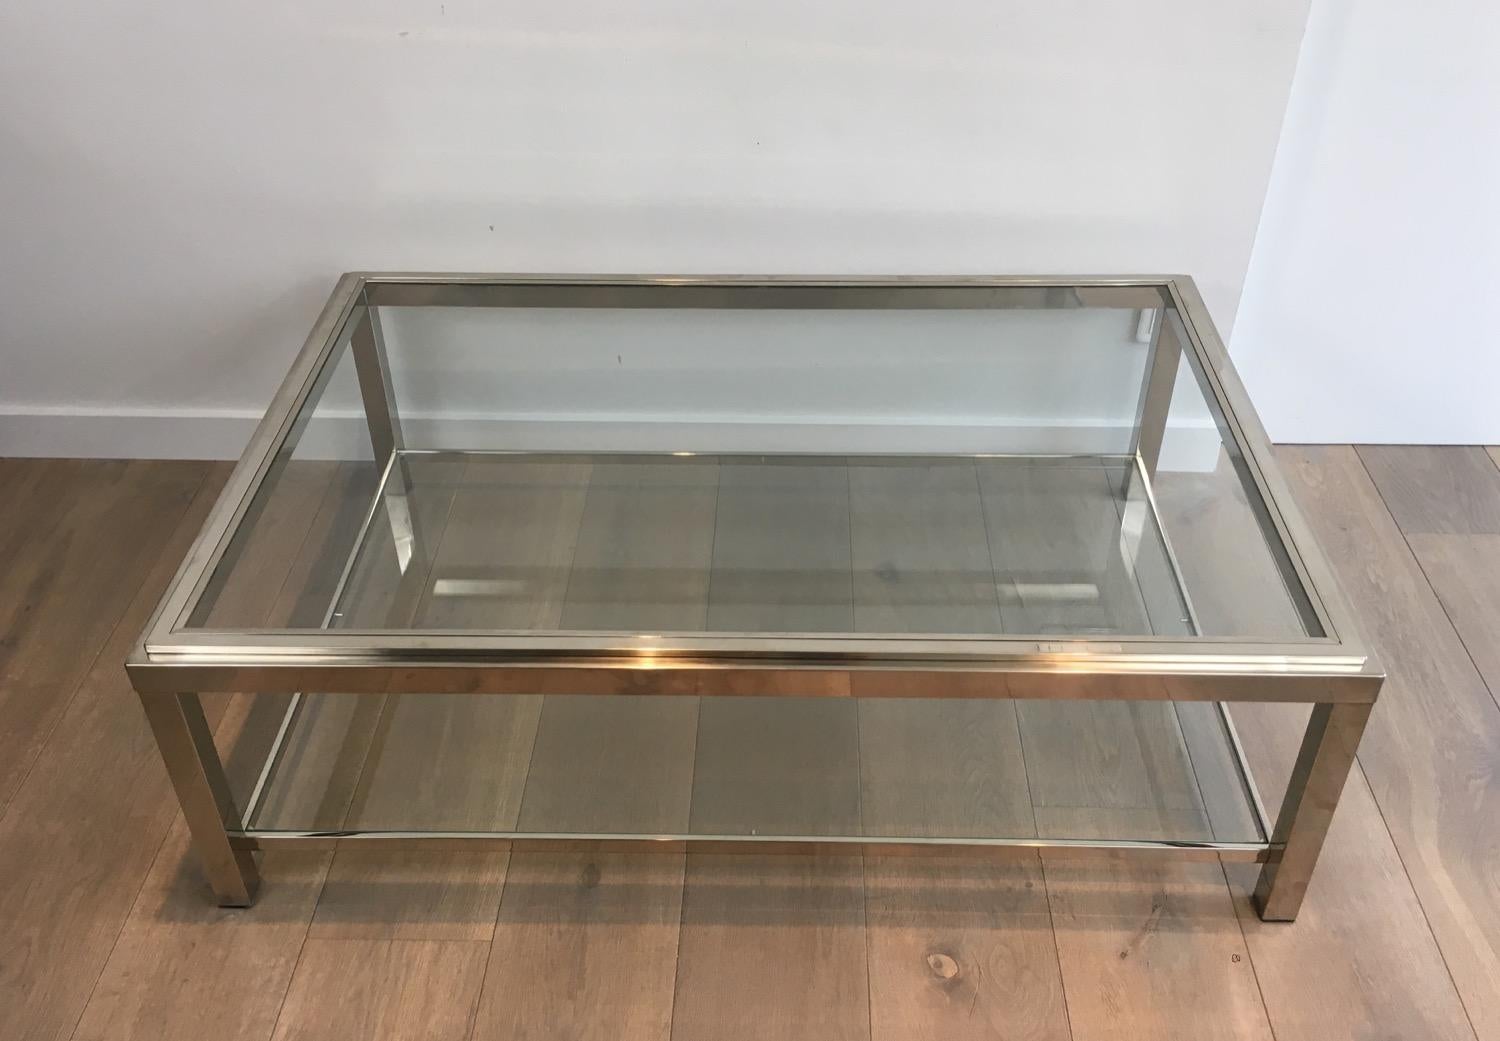 This very nice large coffee table is made of chrome with two clear glass shelves. The top glass is inserted in a chrome frame. This is a very nice French work, circa 1970.